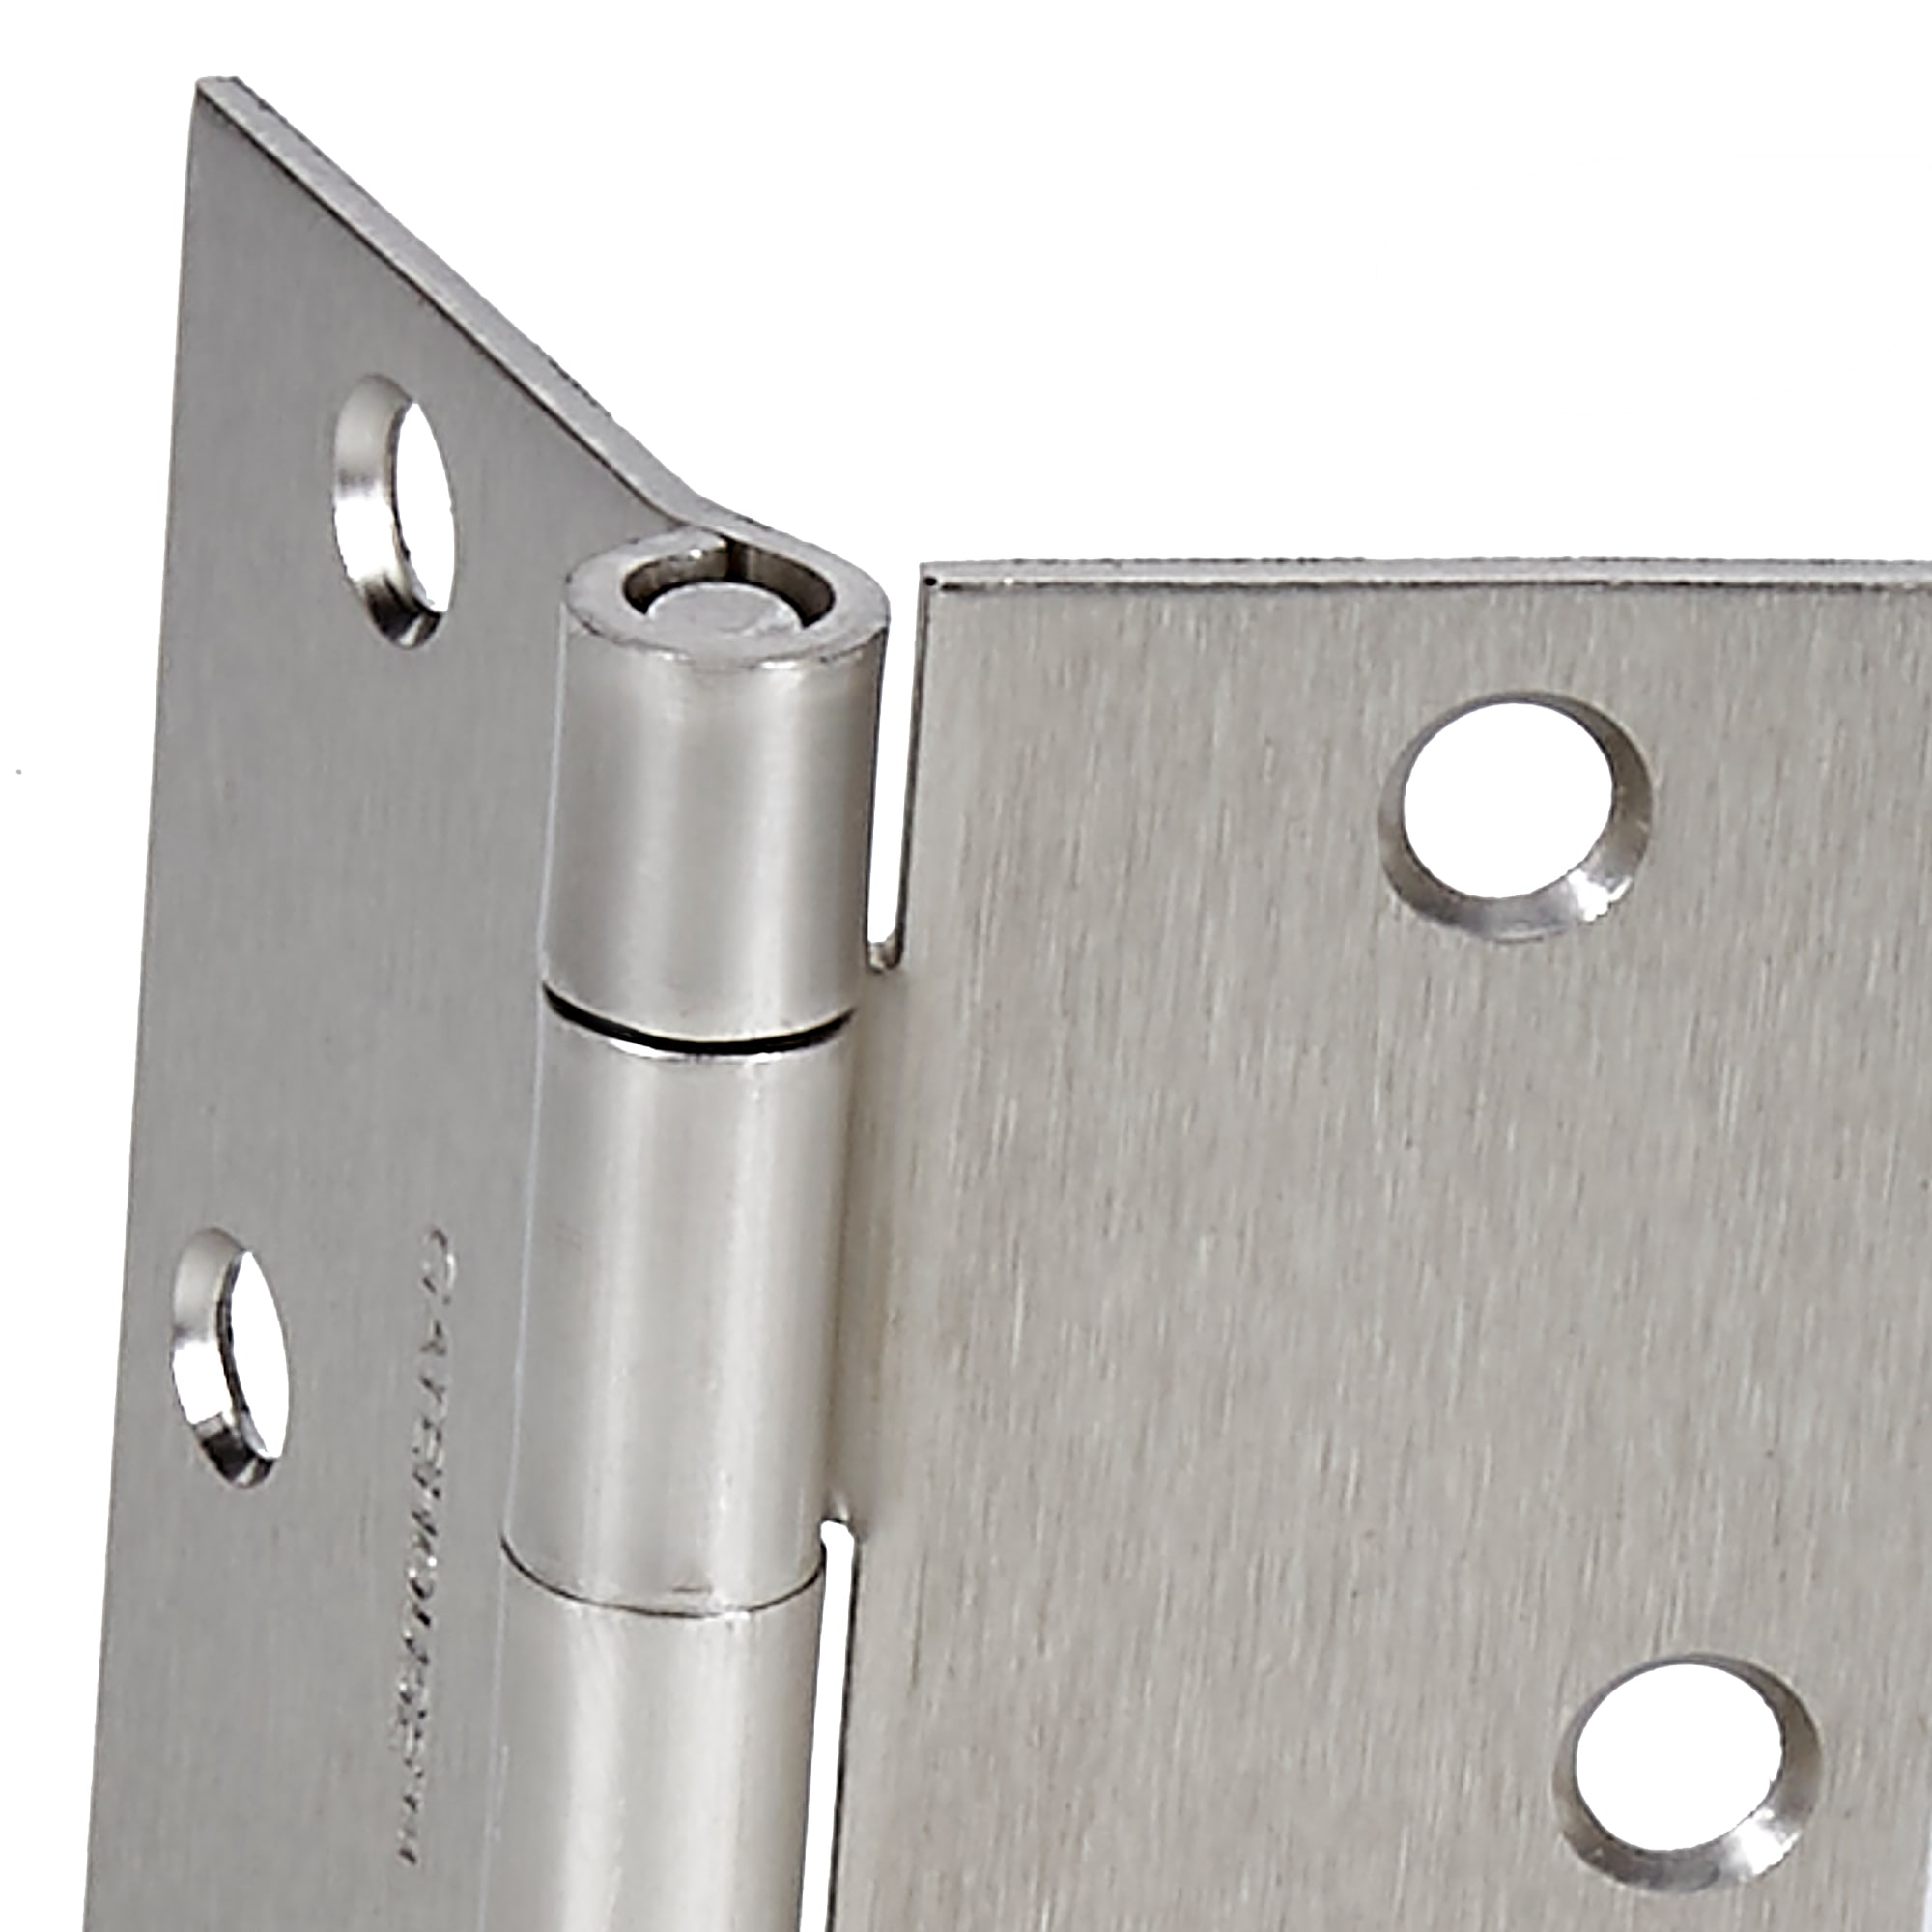 Gatehouse 4-in H Stainless Steel Mortise Interior/Exterior Door